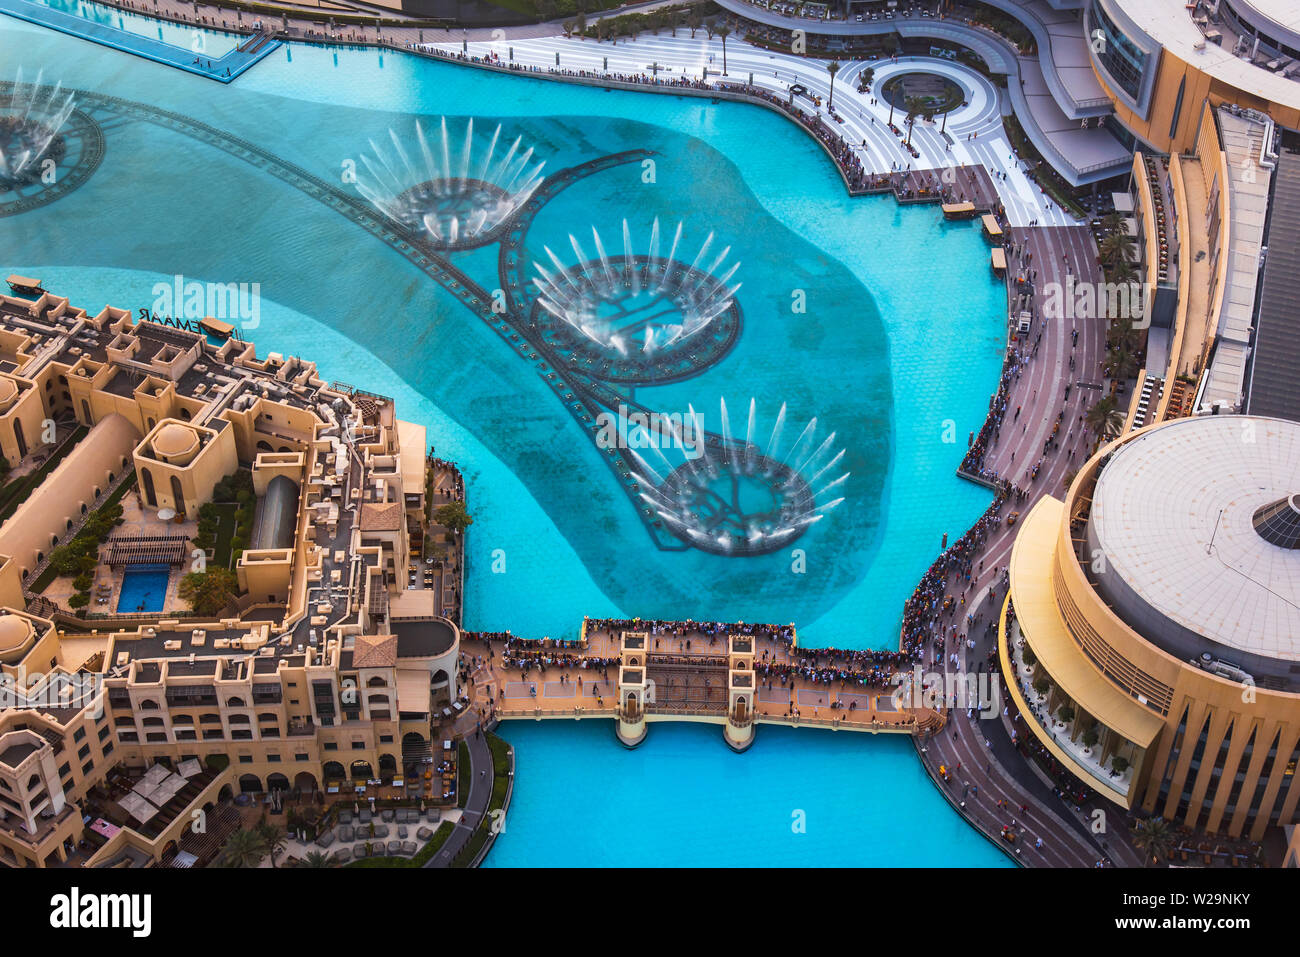 Dubai, United Arab Emirates - July 5, 2019: Dubai mall fountain show surrounded and modern downtown buildings view from above Stock Photo